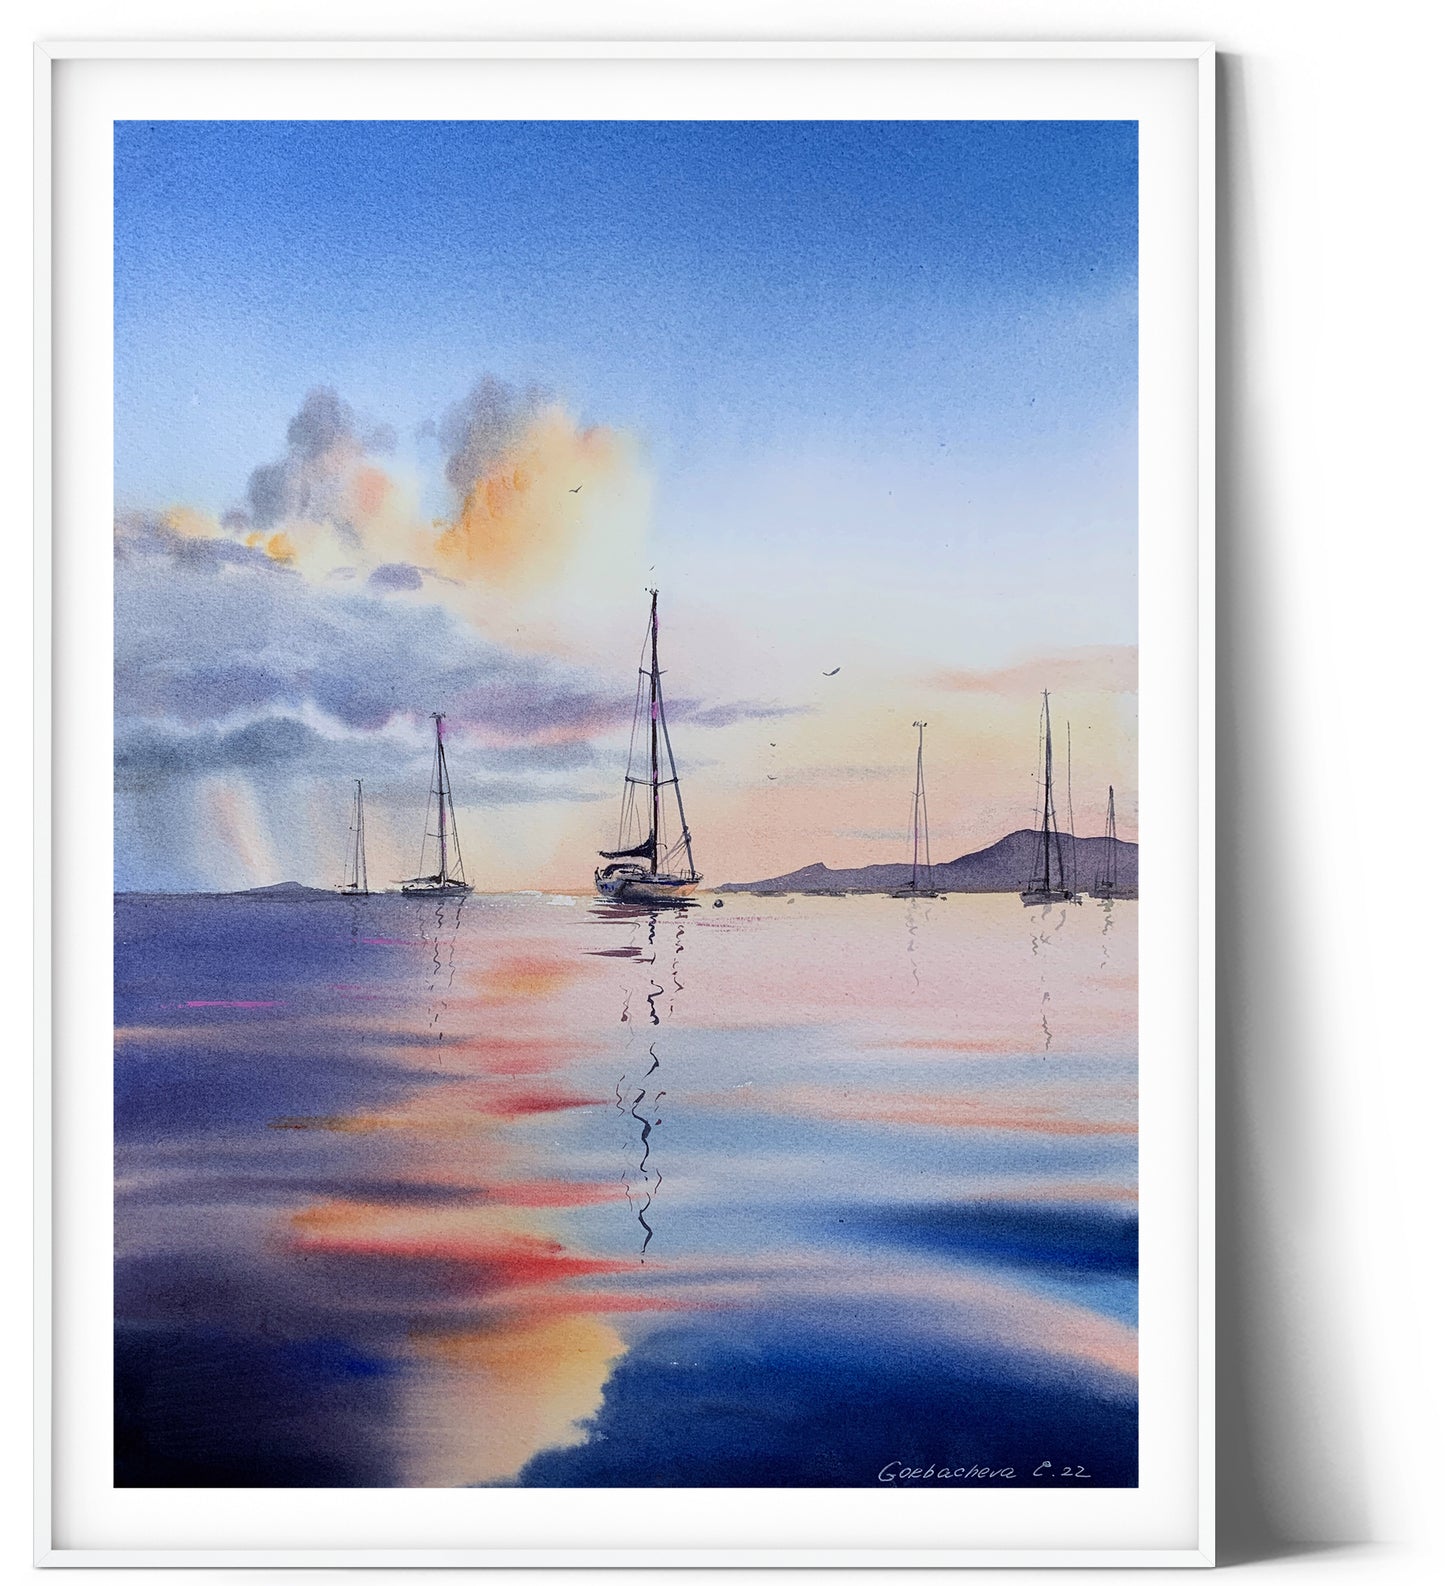 Yacht Watercolor Painting Original, Sailboat Seascape Artwork, Coastal Art, Yachting Bedroom Wall Decor, Gift For Him, Blue Pink